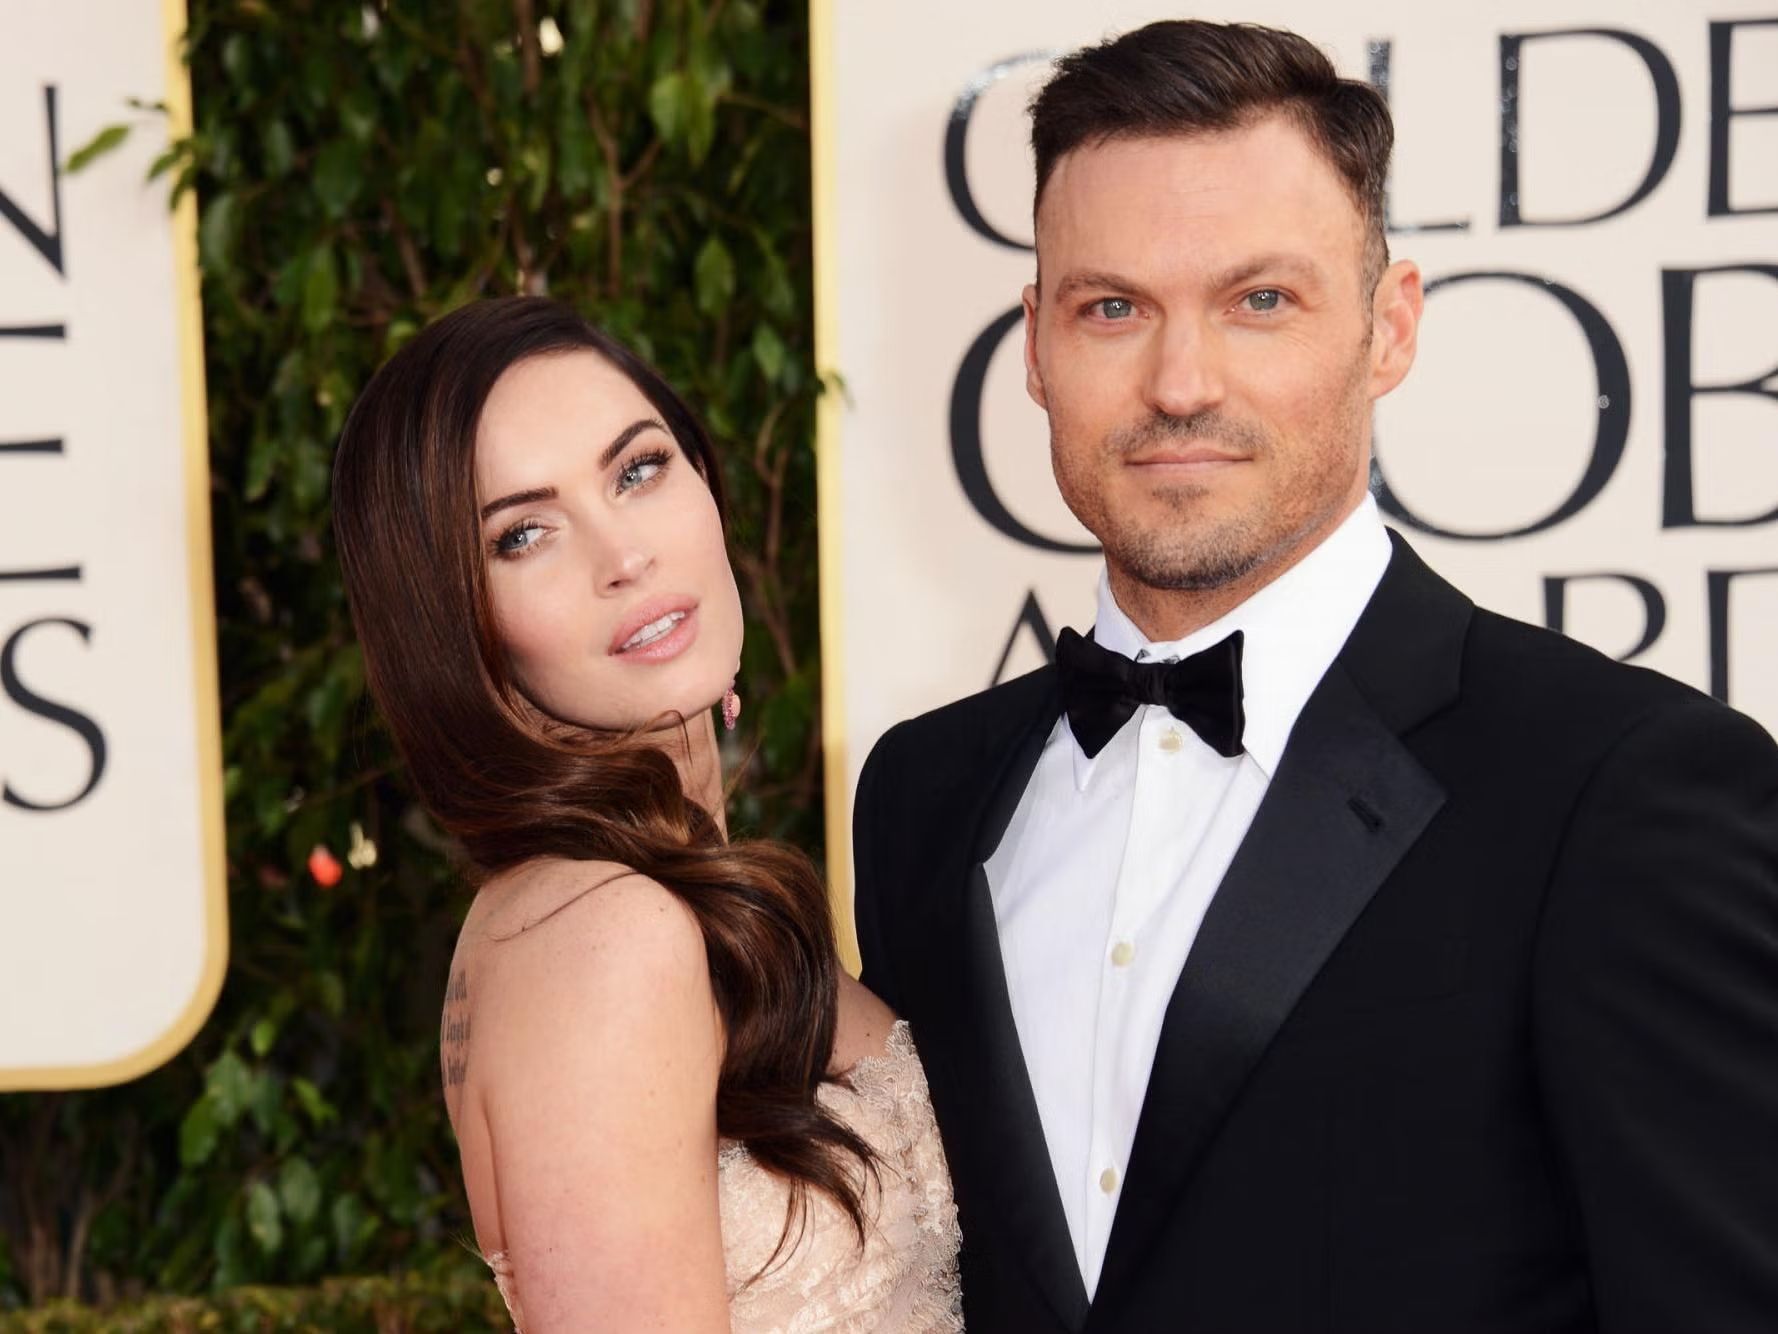 Brian Austin Green Reacts To Love Is Blind Star’s Comparison To Megan Fox